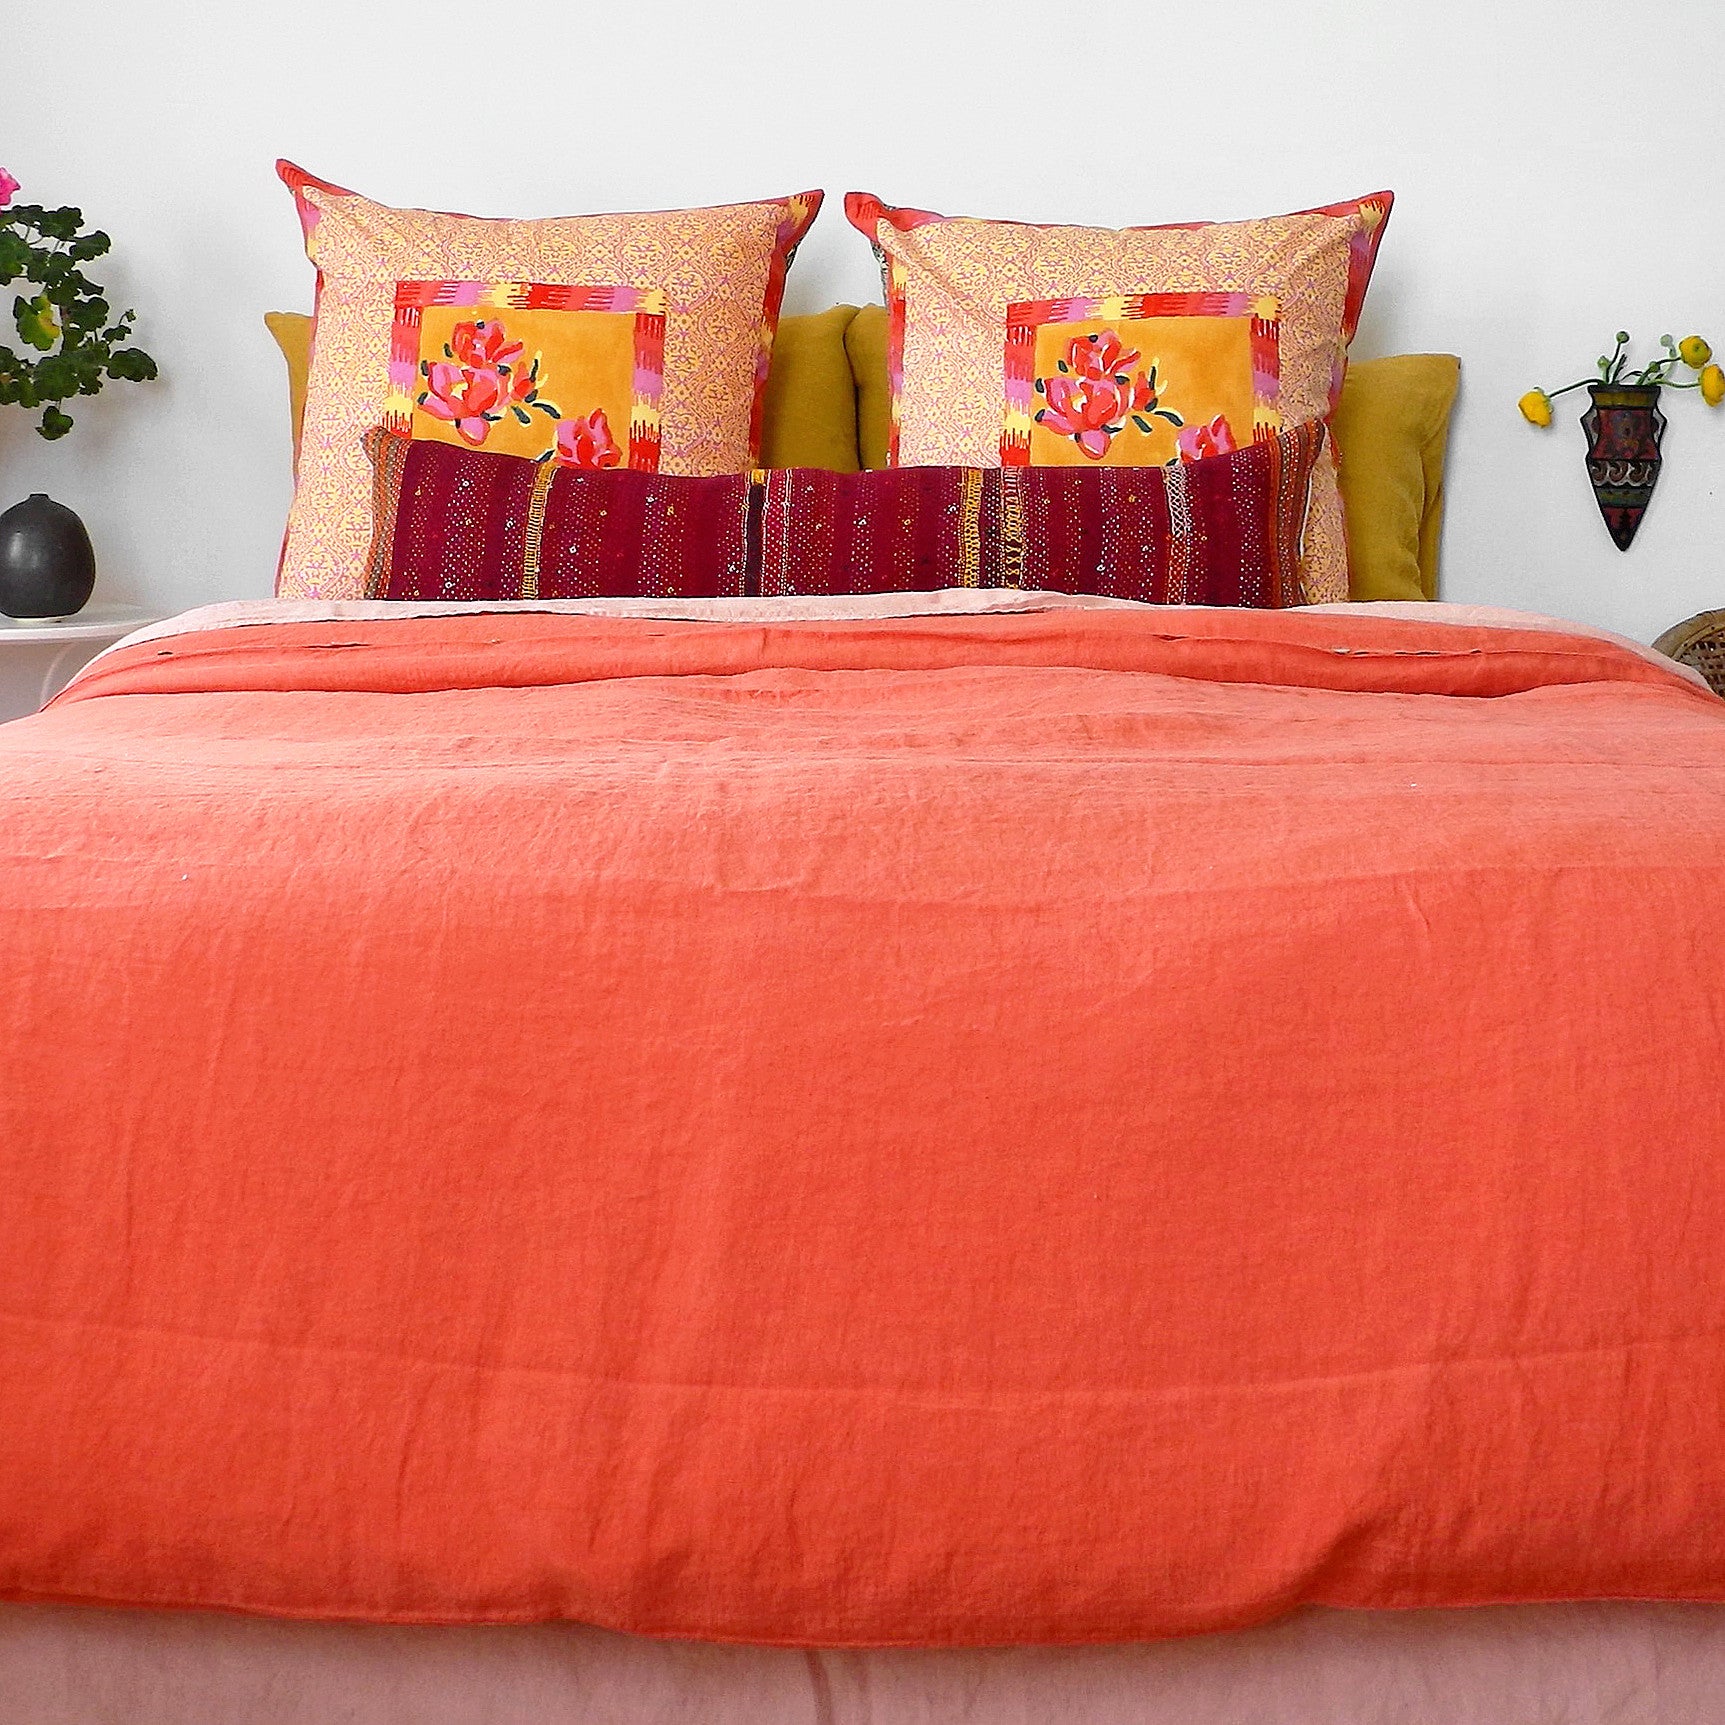 A Linge Particulier Linen Duvet in Terracotta gives a vibrant orange and sunset color to this duvet for a colorful linen bedding look from Collyer&#39;s Mansion